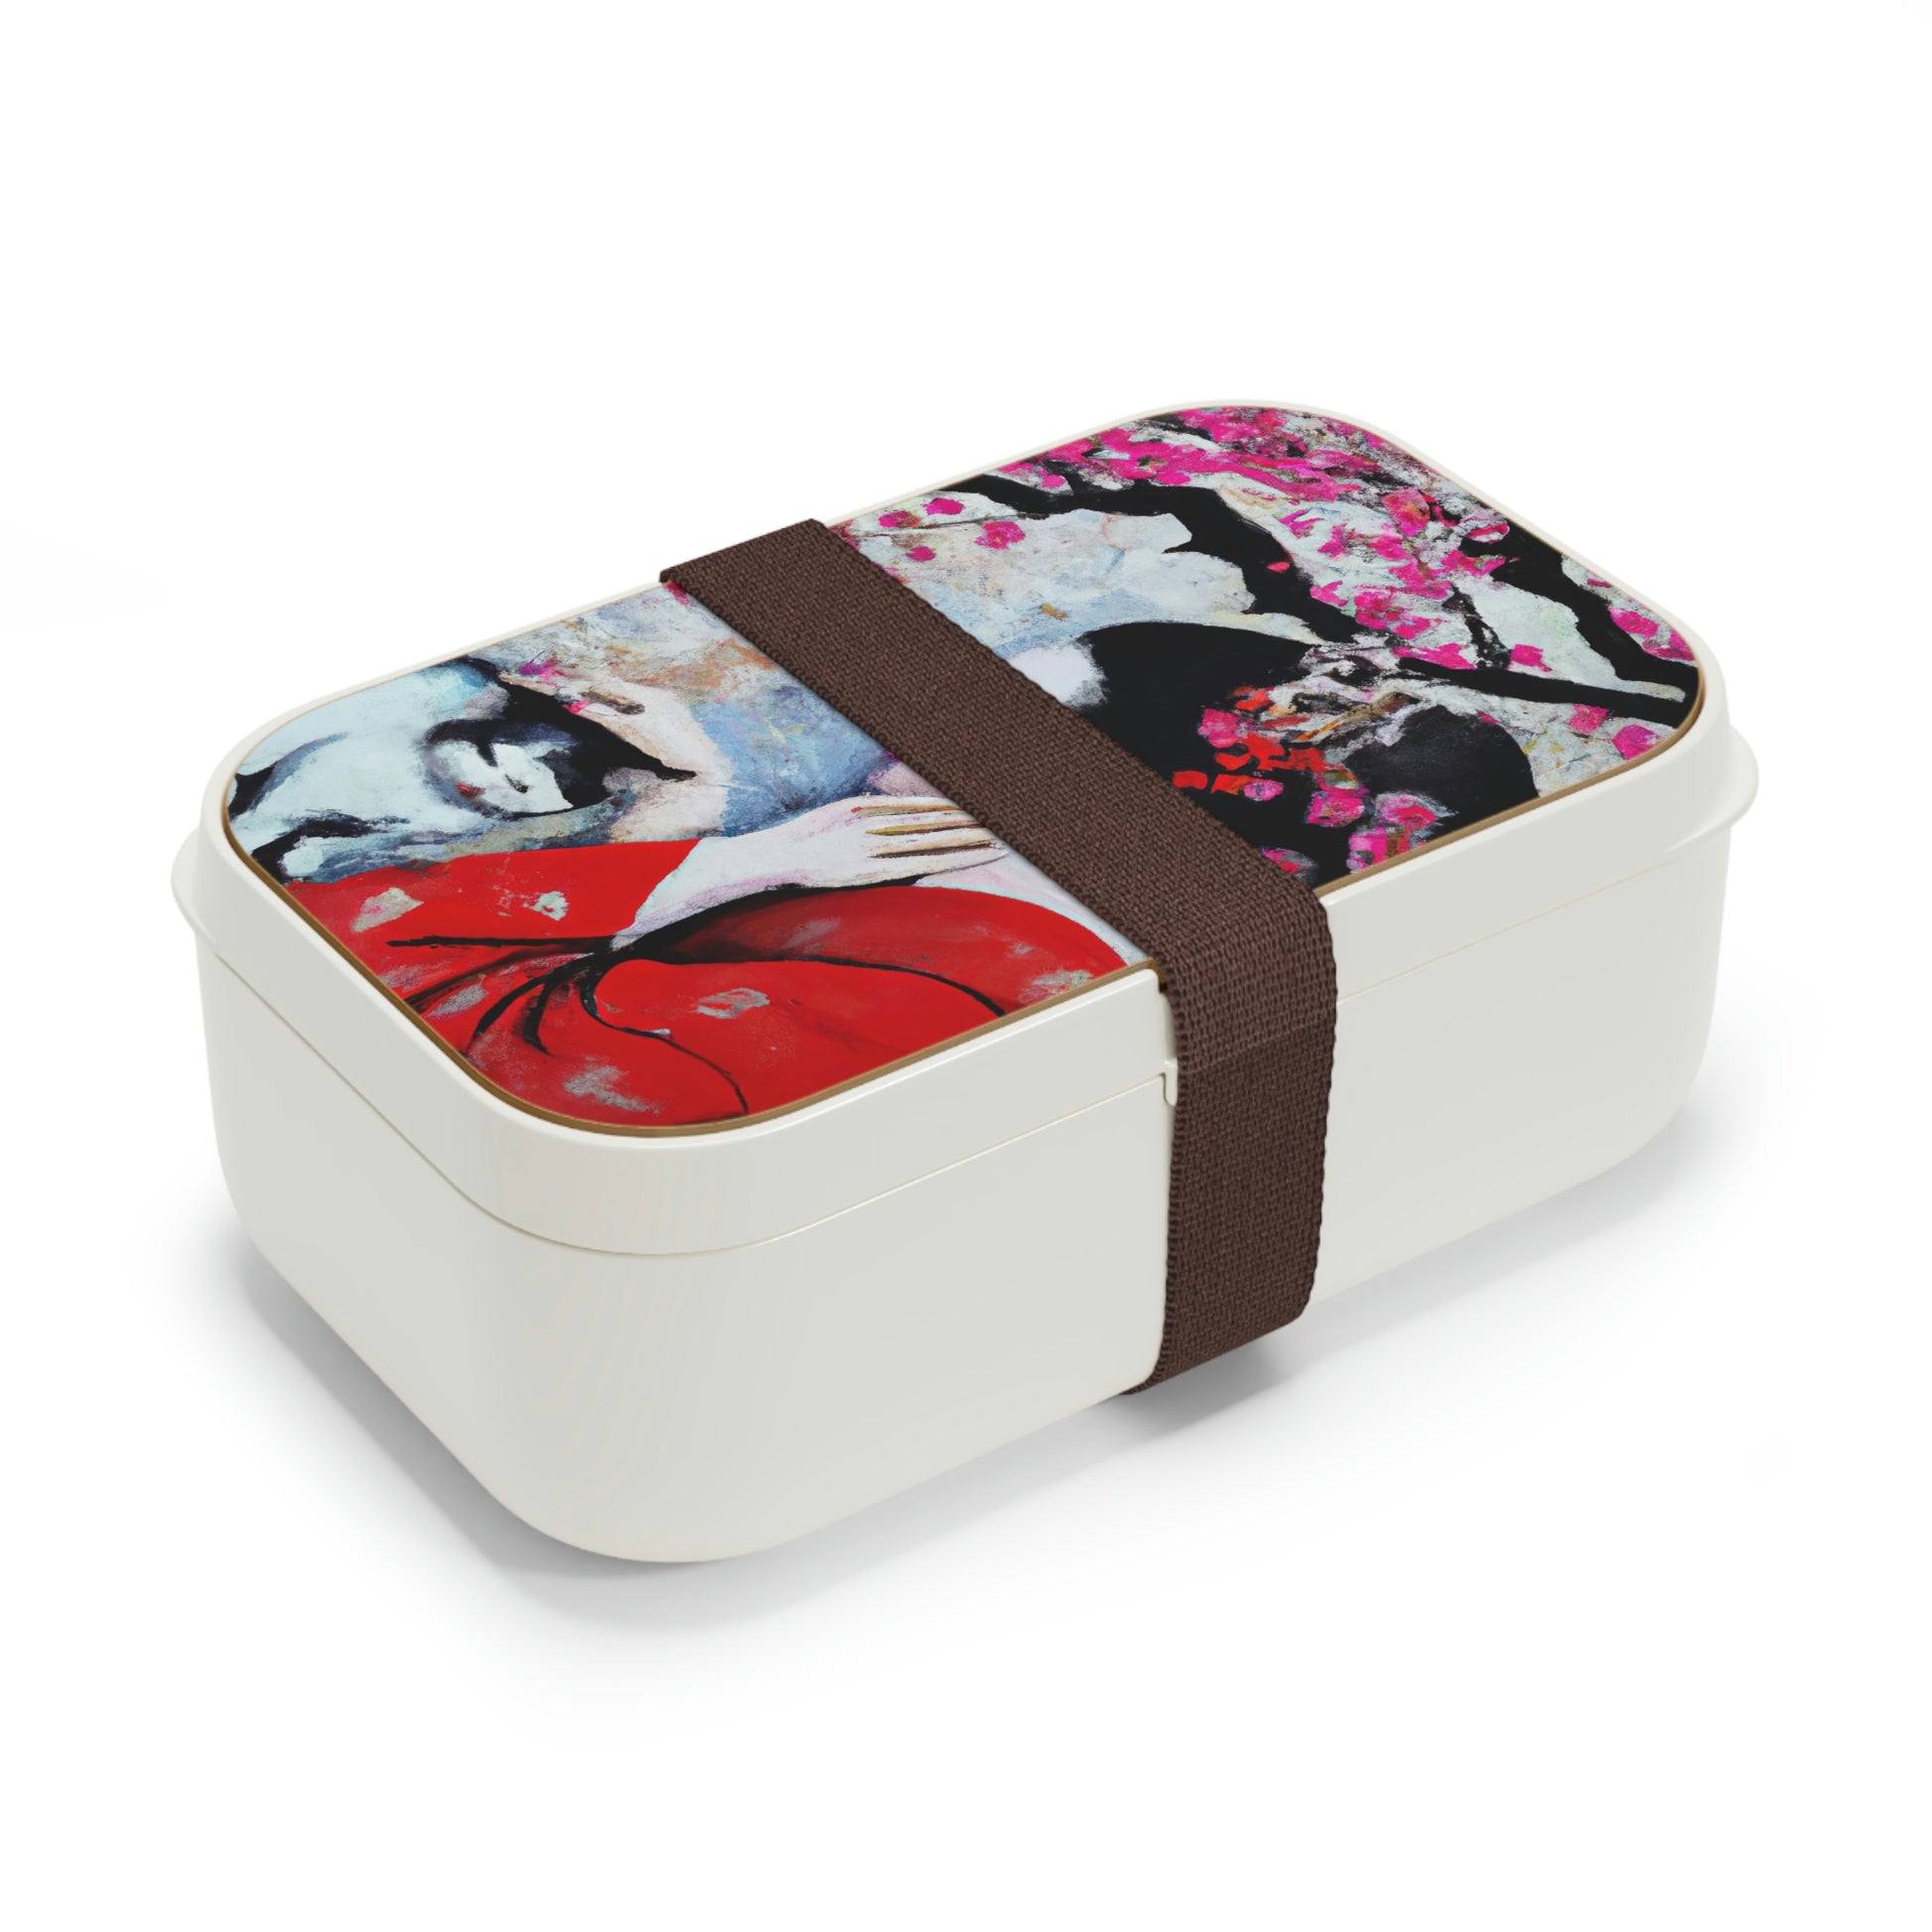 Geisha and a cat Bento Lunch Box, art painting maiko and a cat and a sakura bento, cat feudal japan lunch box, back to school cat lover gift